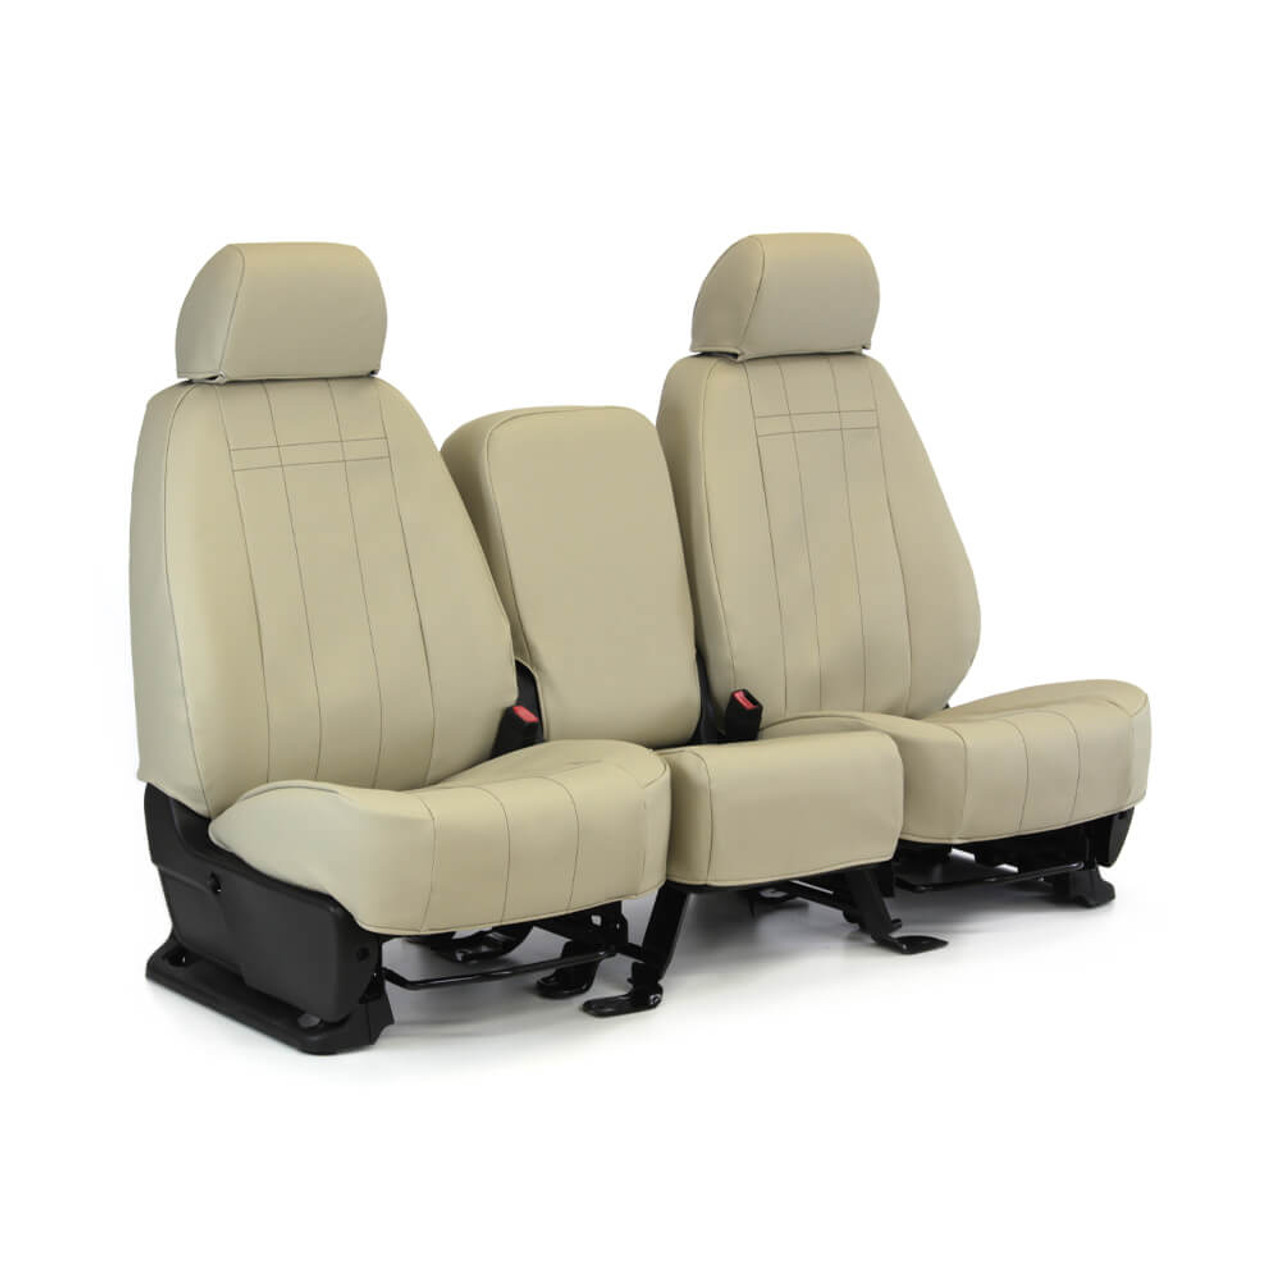 Imitation Leather Seat Covers: Achieve a Real Leather Look